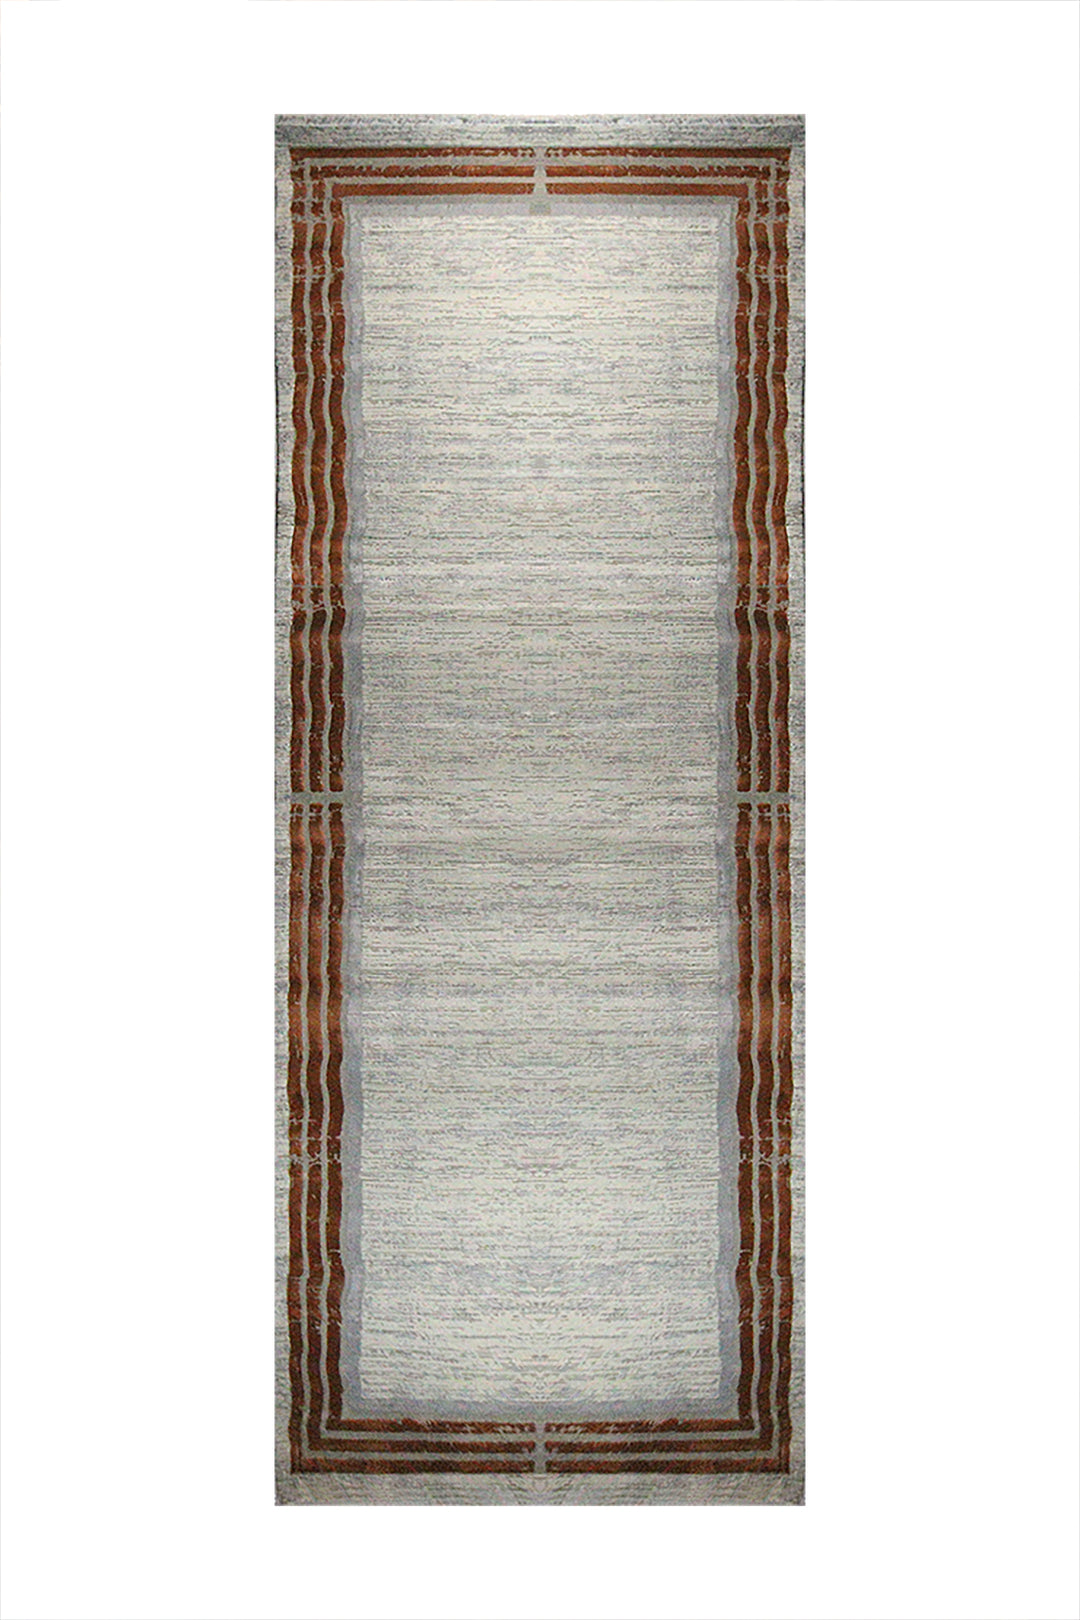 Turkish Modern  Festival 1 Rug - Gray  and Brown - 6.5 x 15. FT - Superior Comfort, Modern Style Accent Rugs